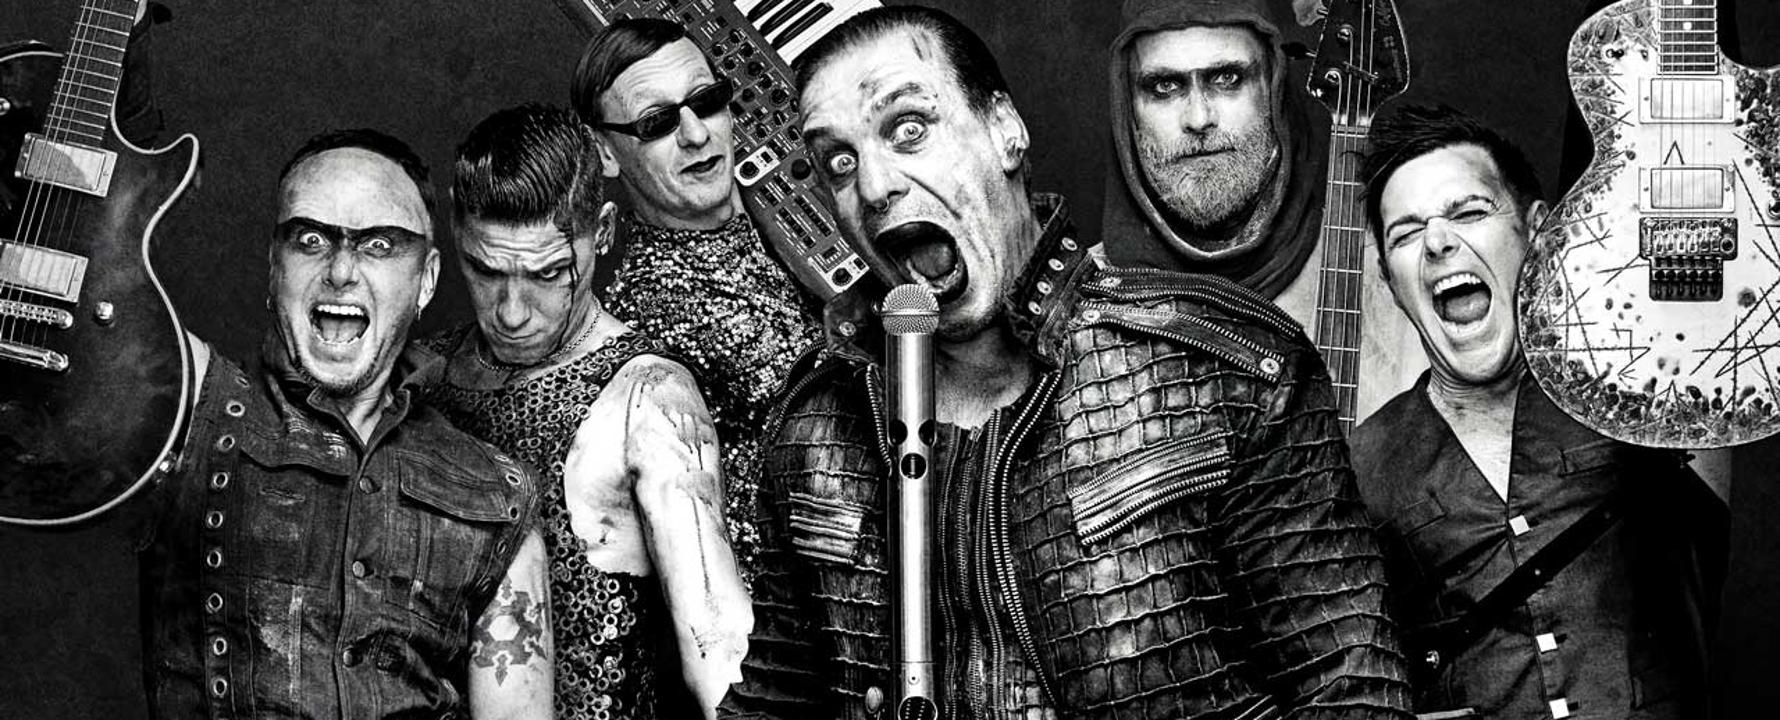 Promotional photograph of Rammstein.